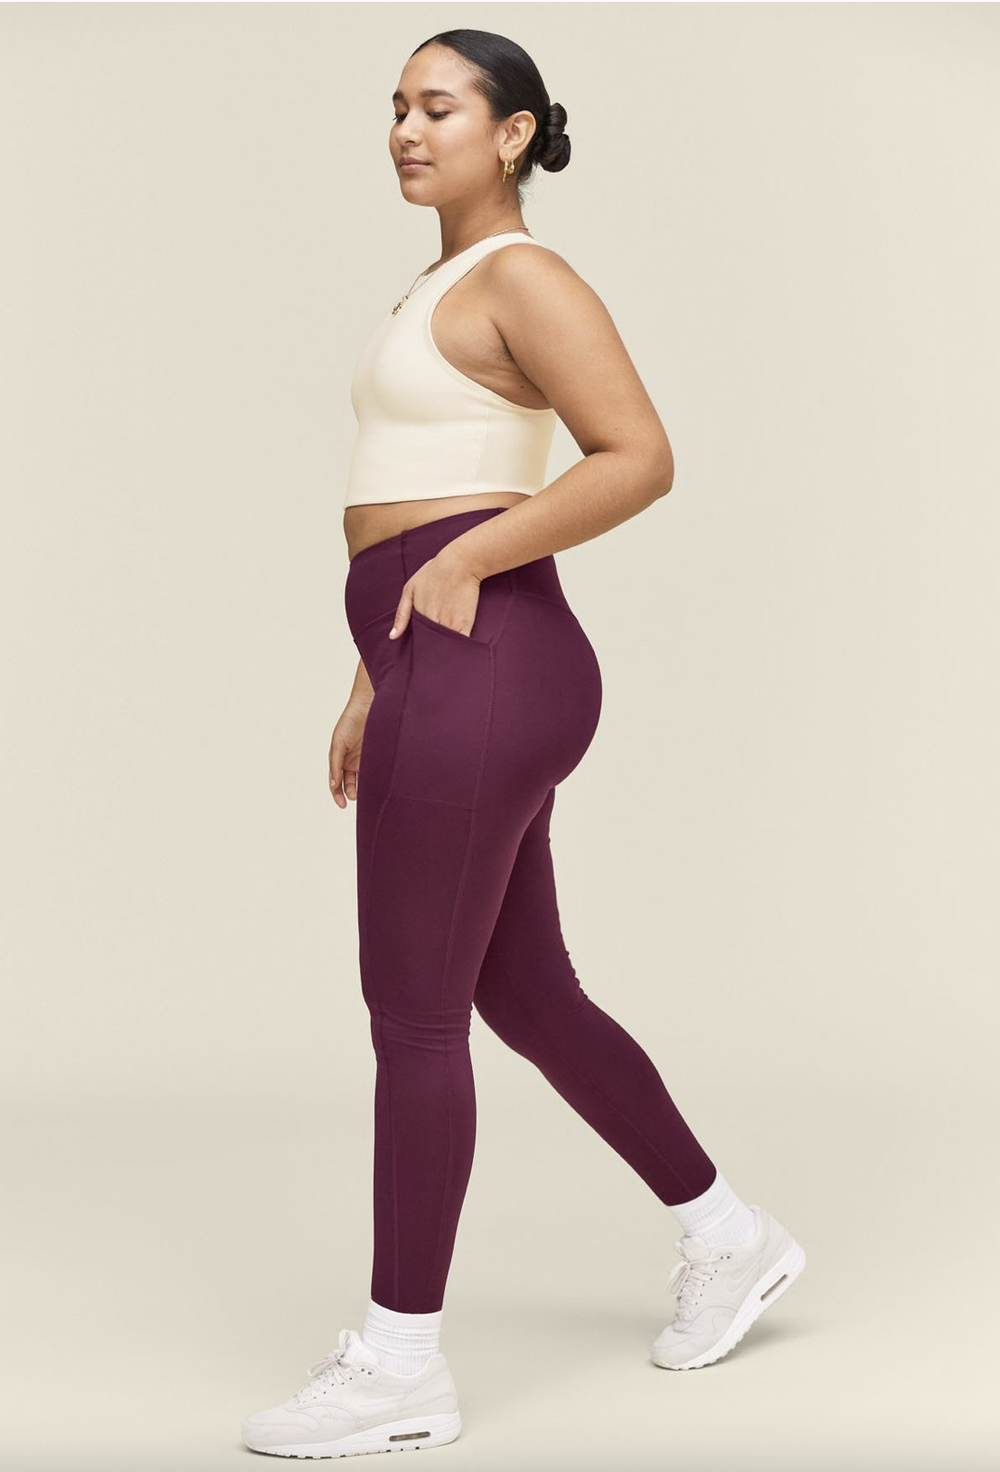 A plastic water bottle can take up to 500 years to decompose. Each pair of  GIRLFRIEND compression leggings diverts 25 bottles from landfills and is  79% RPET and 21% spandex. To care